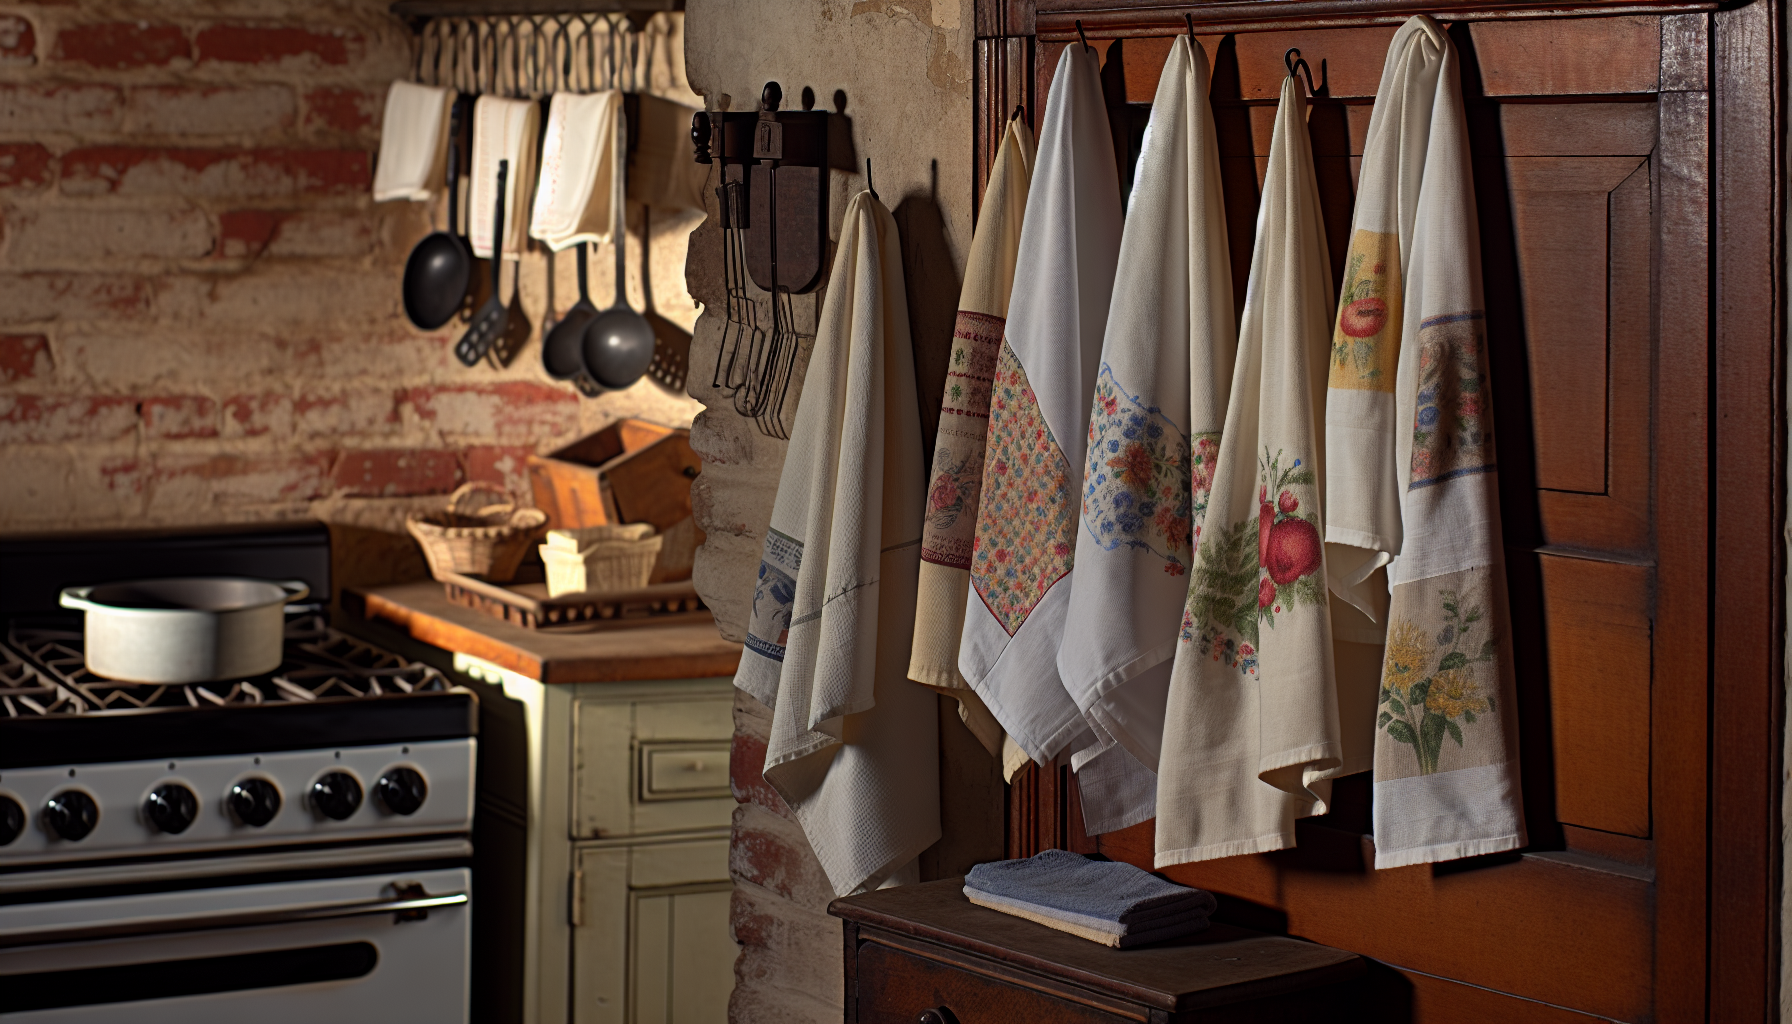 Flour sack tea towels in a rustic kitchen setting